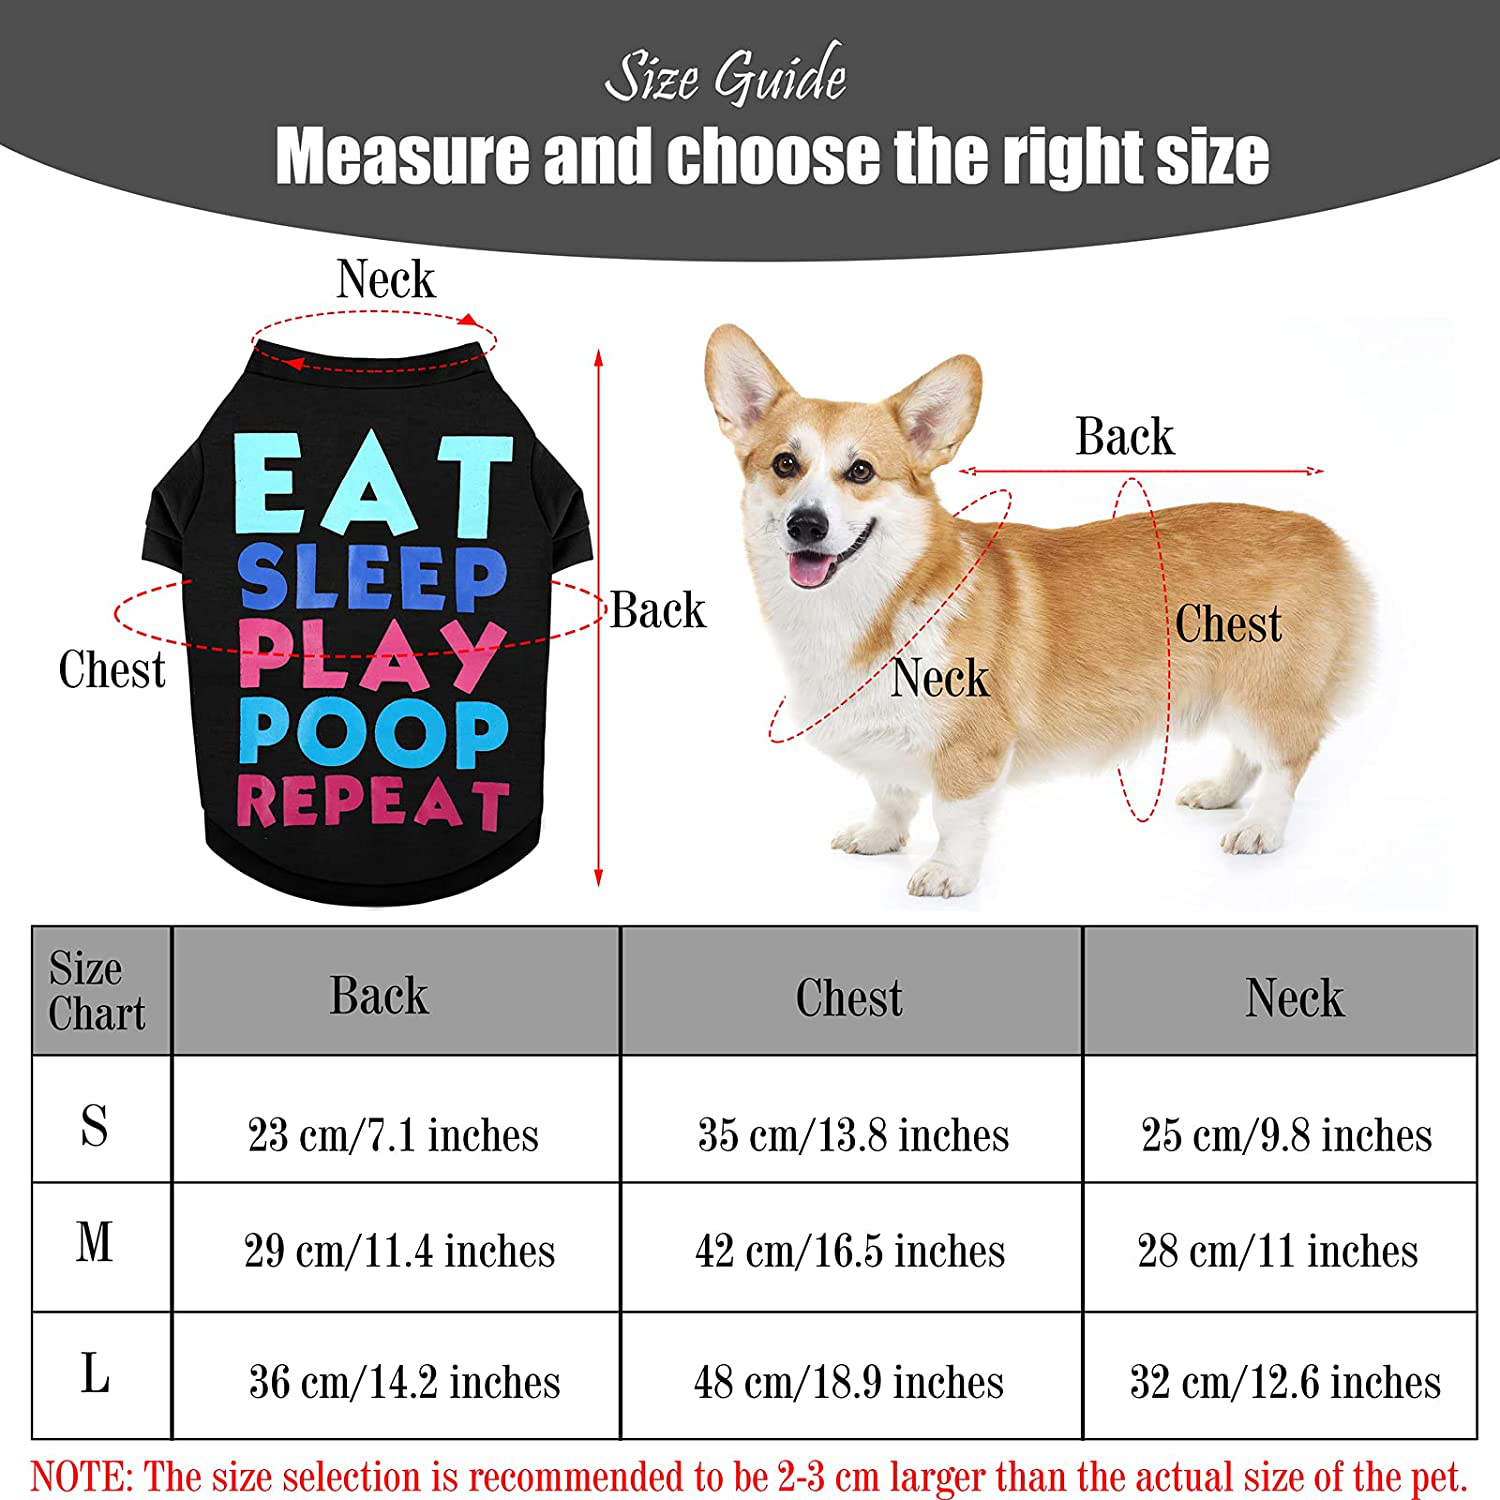 RUODON 3 Printed Puppy Shirts Dog Shirt Pet T-Shirt and Dog Vest Soft Puppy Dog Clothes Pet Outfits Cute Pet Sweatshirt for Small Dogs and Cats